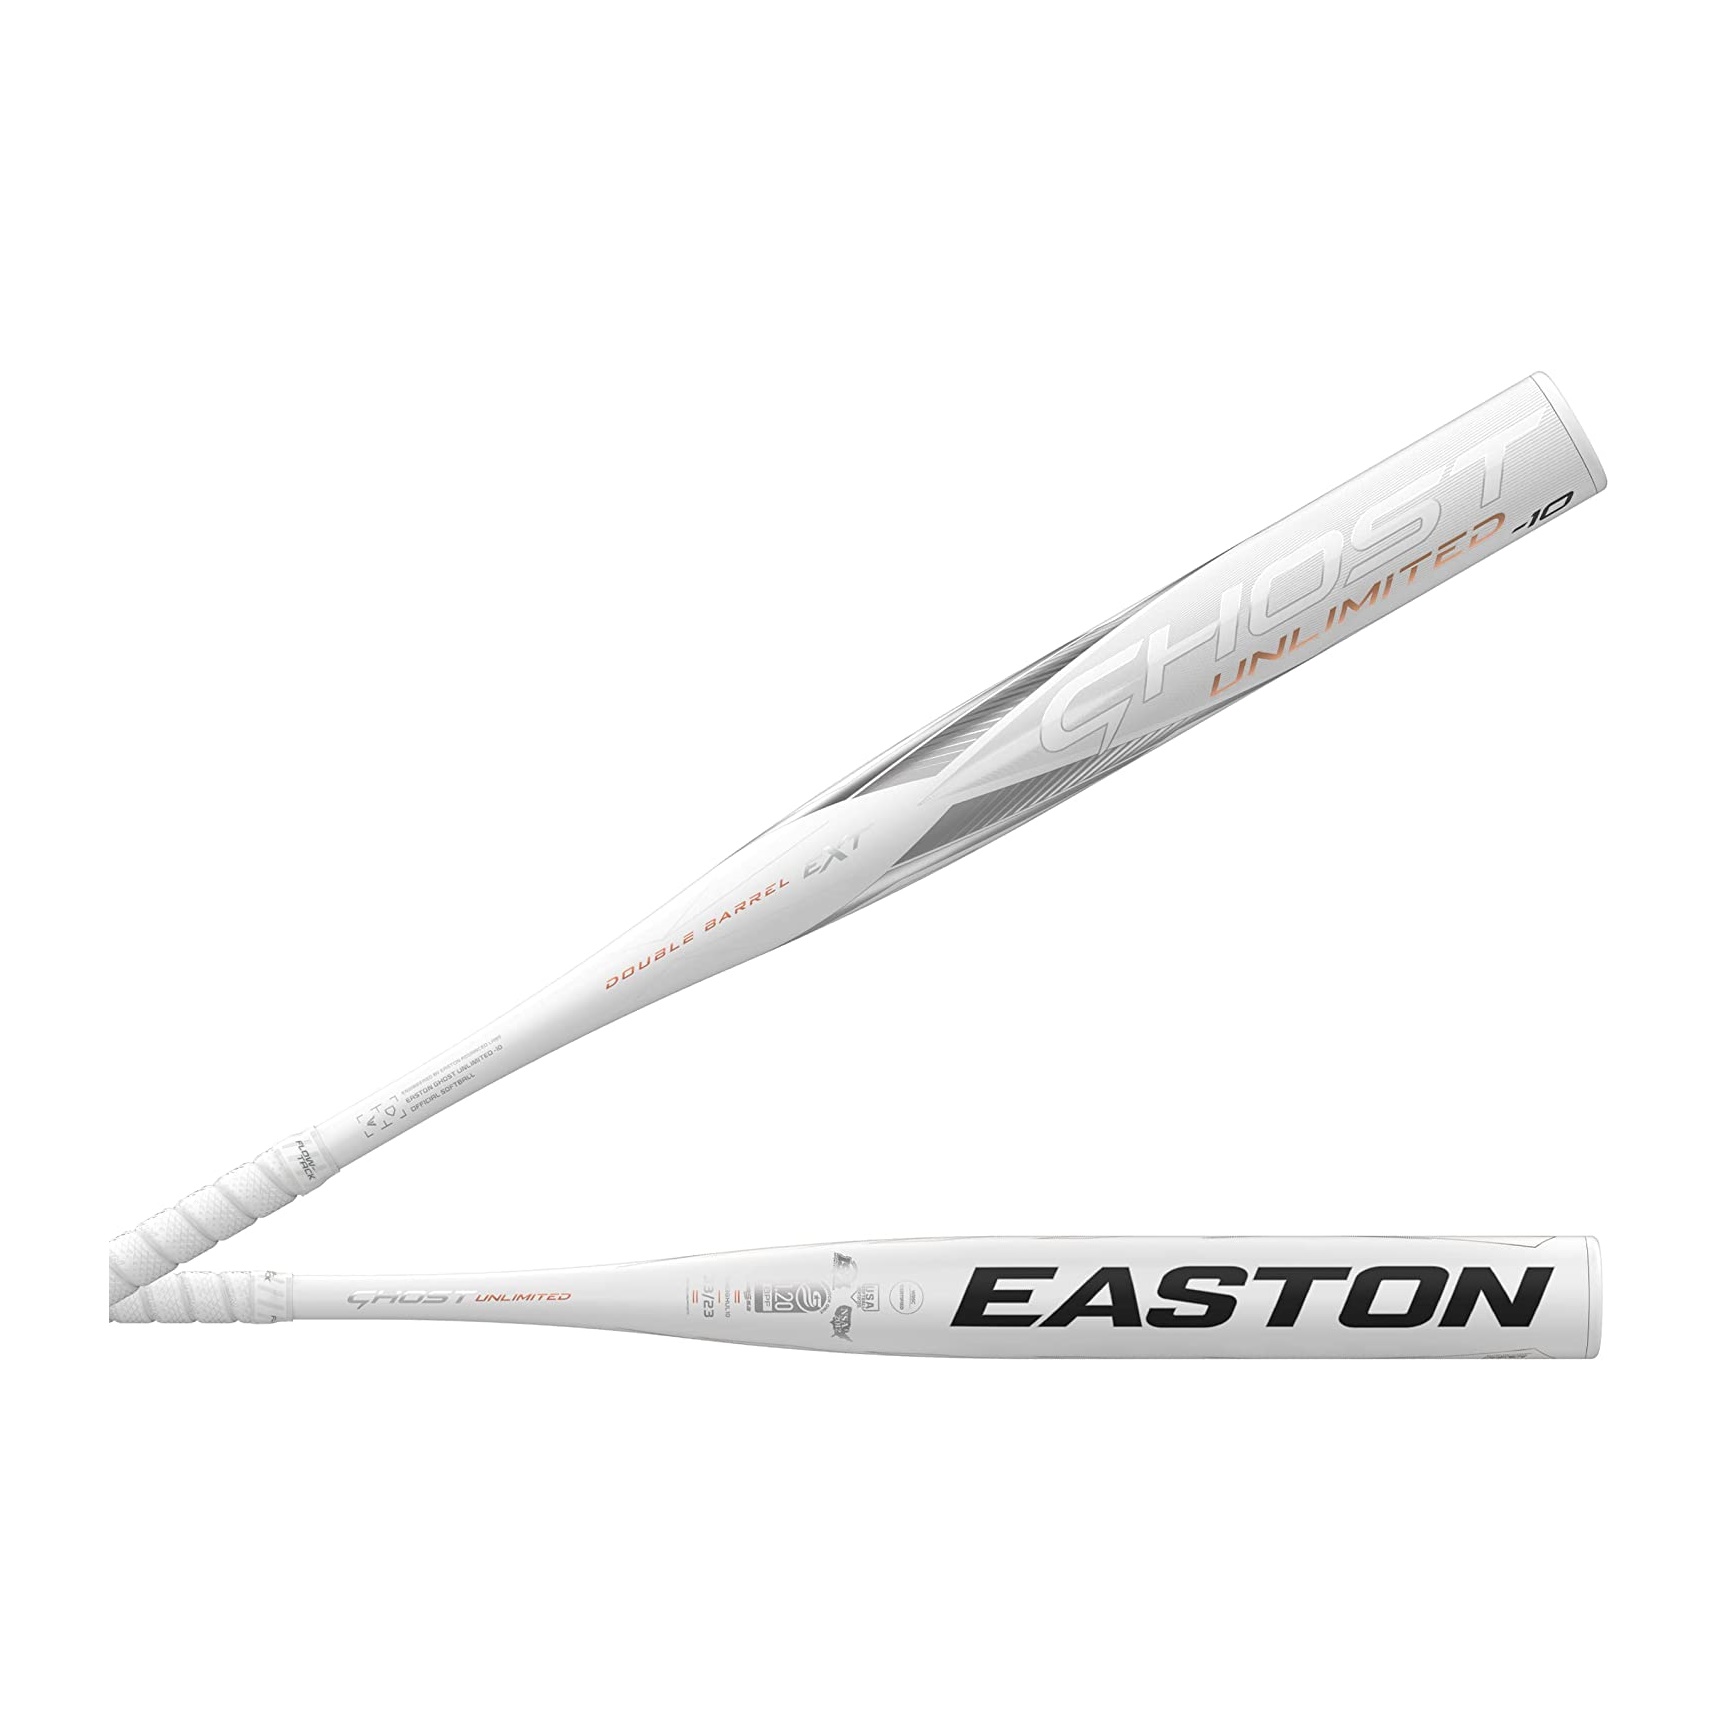 easton-ghost-unlimited-fp23ghul-10-fastpitch-softball-bat-33-inch-23-oz FP23GHUL10-3323 Easton 628412397534 Introducing the Easton Ghost Unlimited Fastpitch Softball Bat a true game-changer